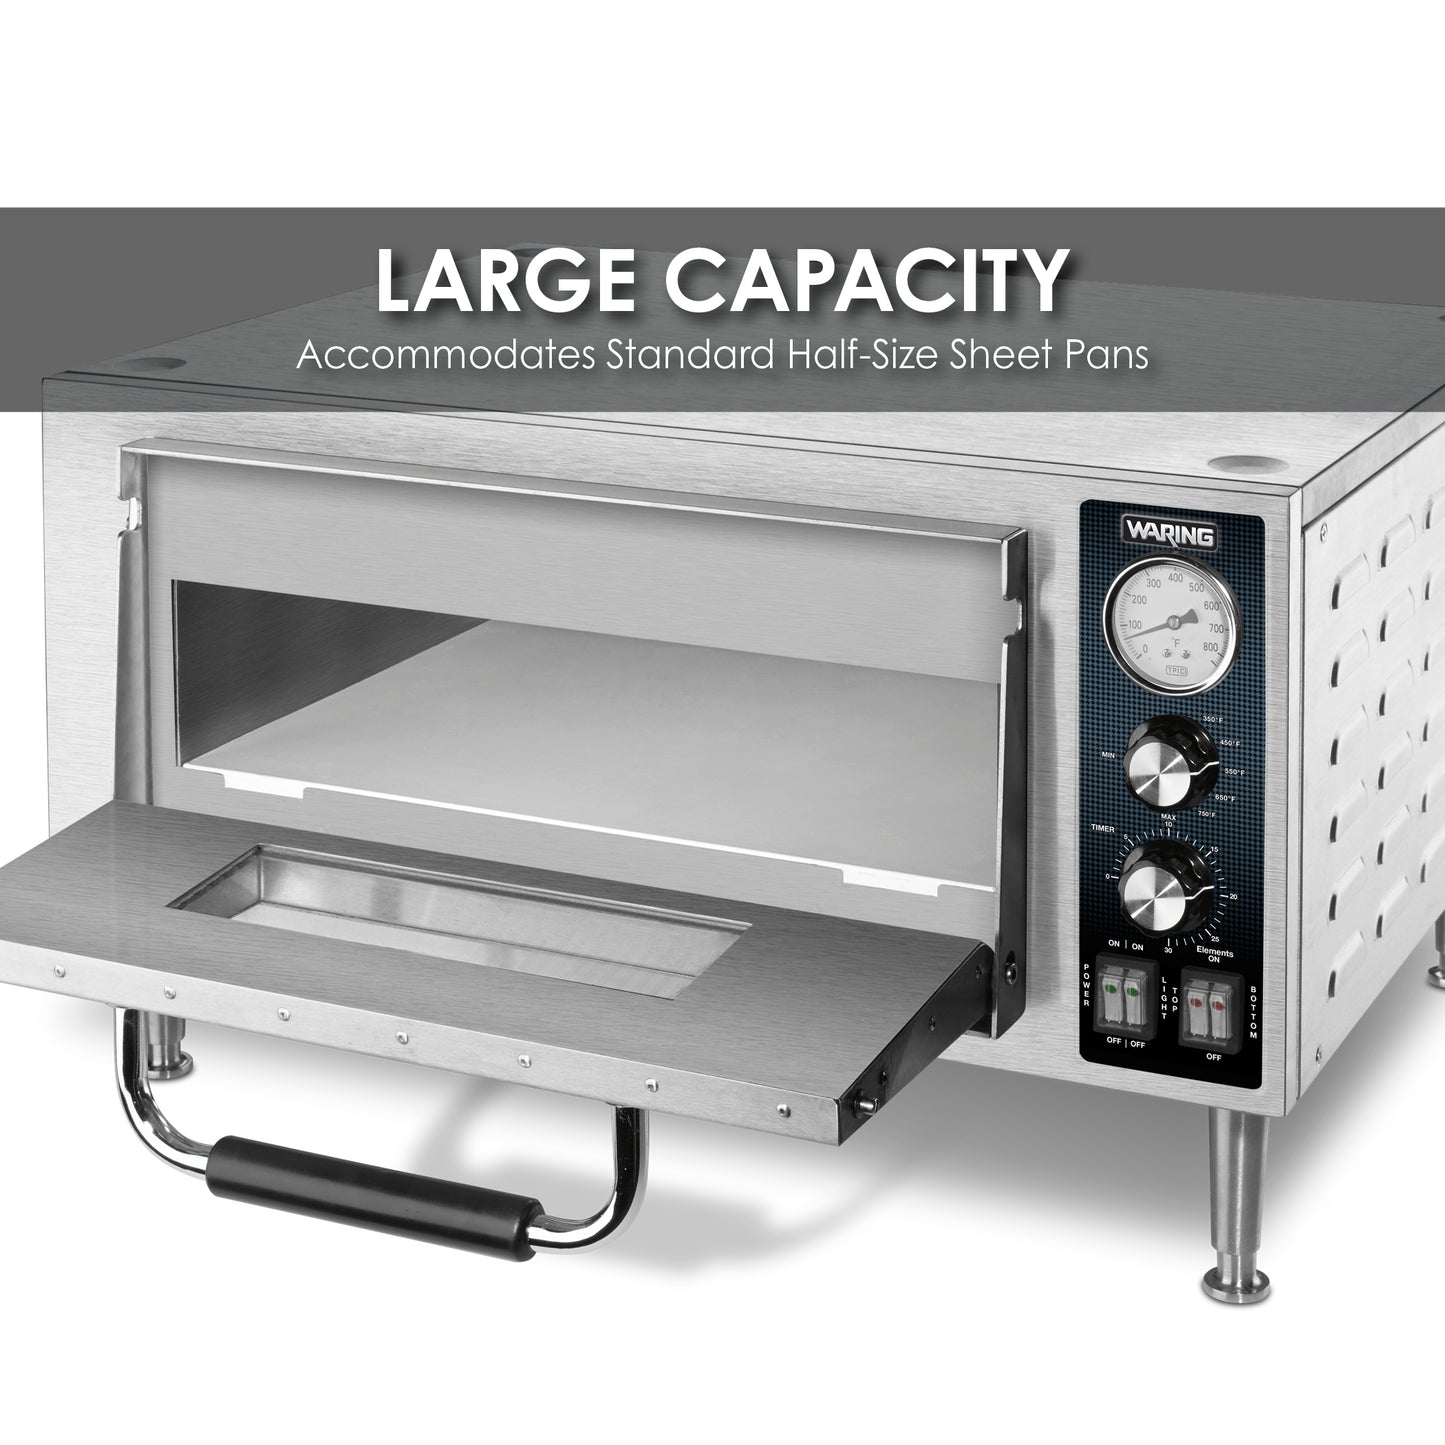 Waring WPO500 Commercial Single-Deck Pizza Oven, 120V-1800W